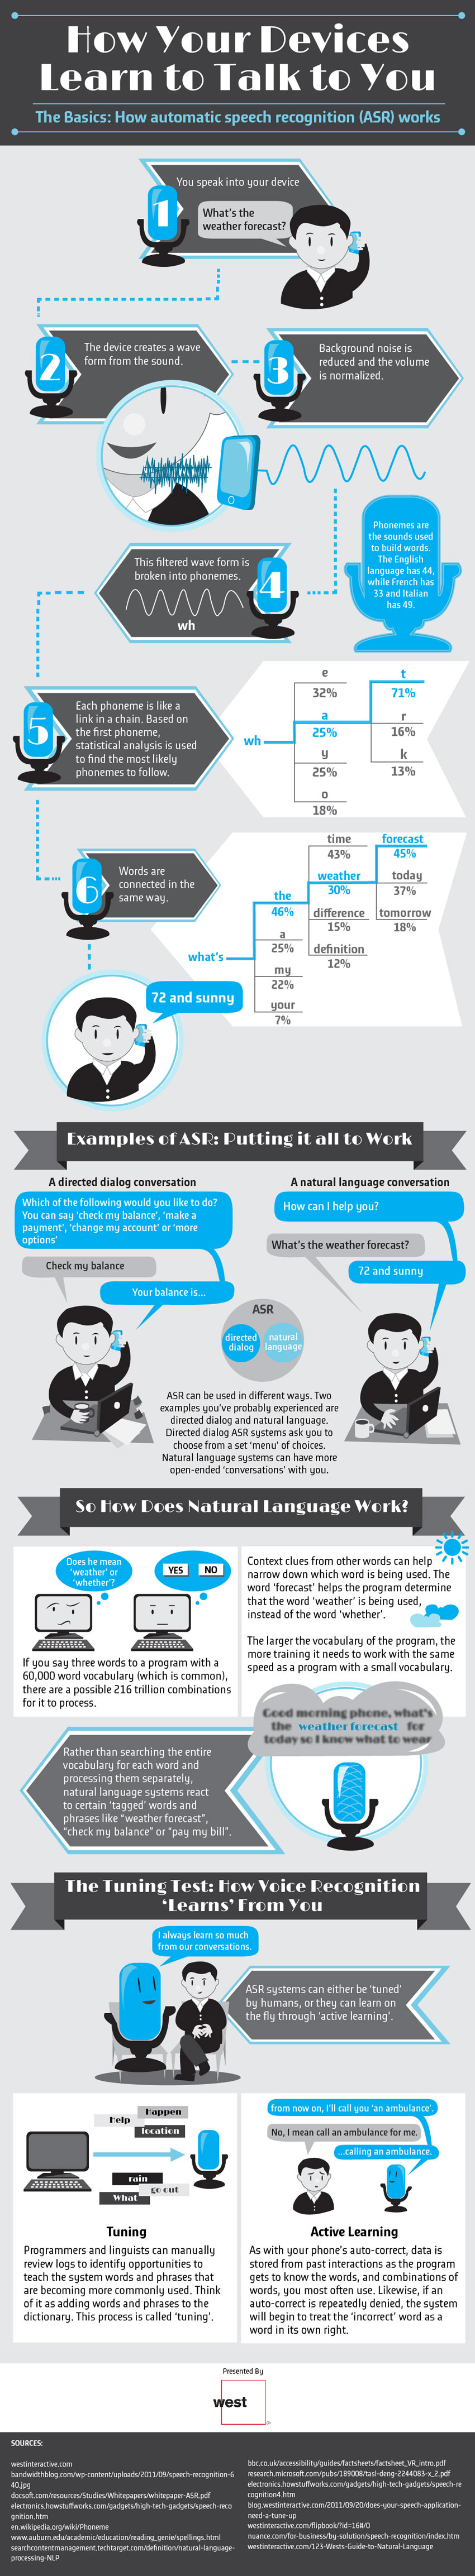 How Automatic Speech Recognition (ASR) works - infographic